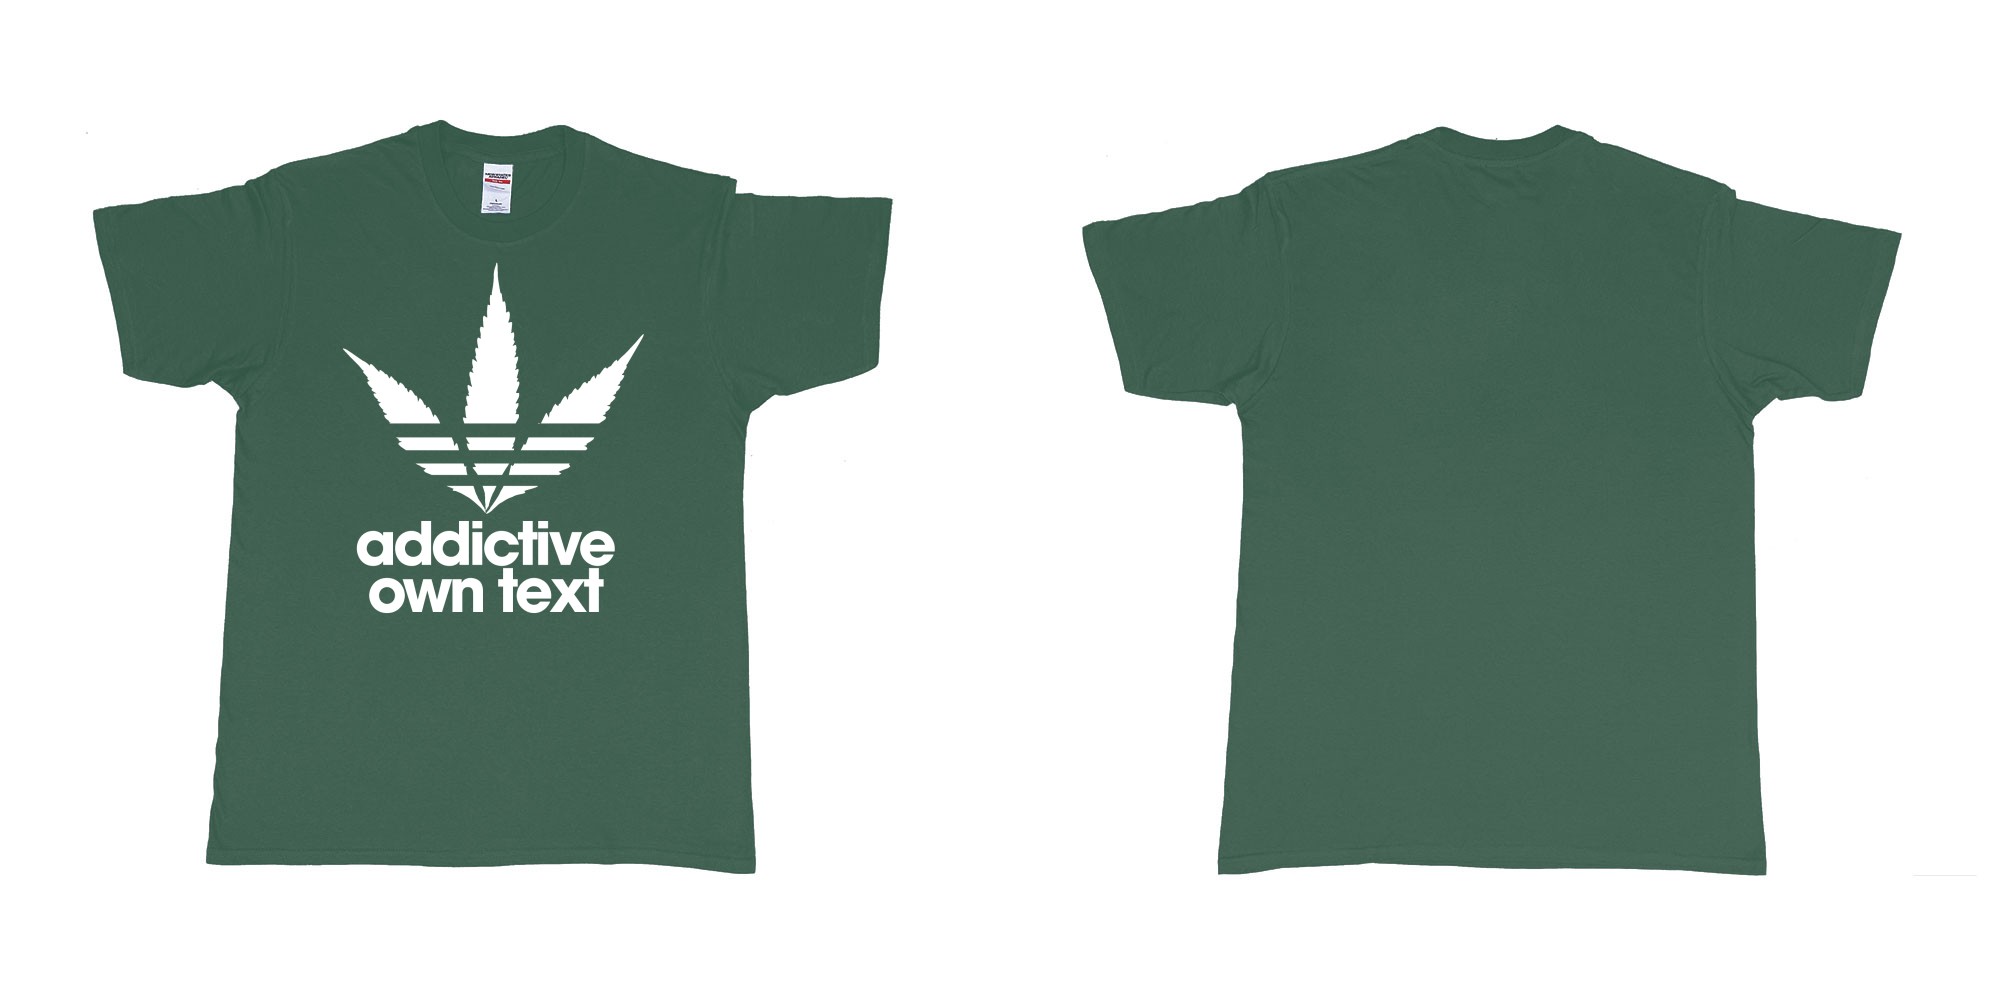 Custom tshirt design adidas ganja addictive own custom printed text in fabric color forest-green choice your own text made in Bali by The Pirate Way